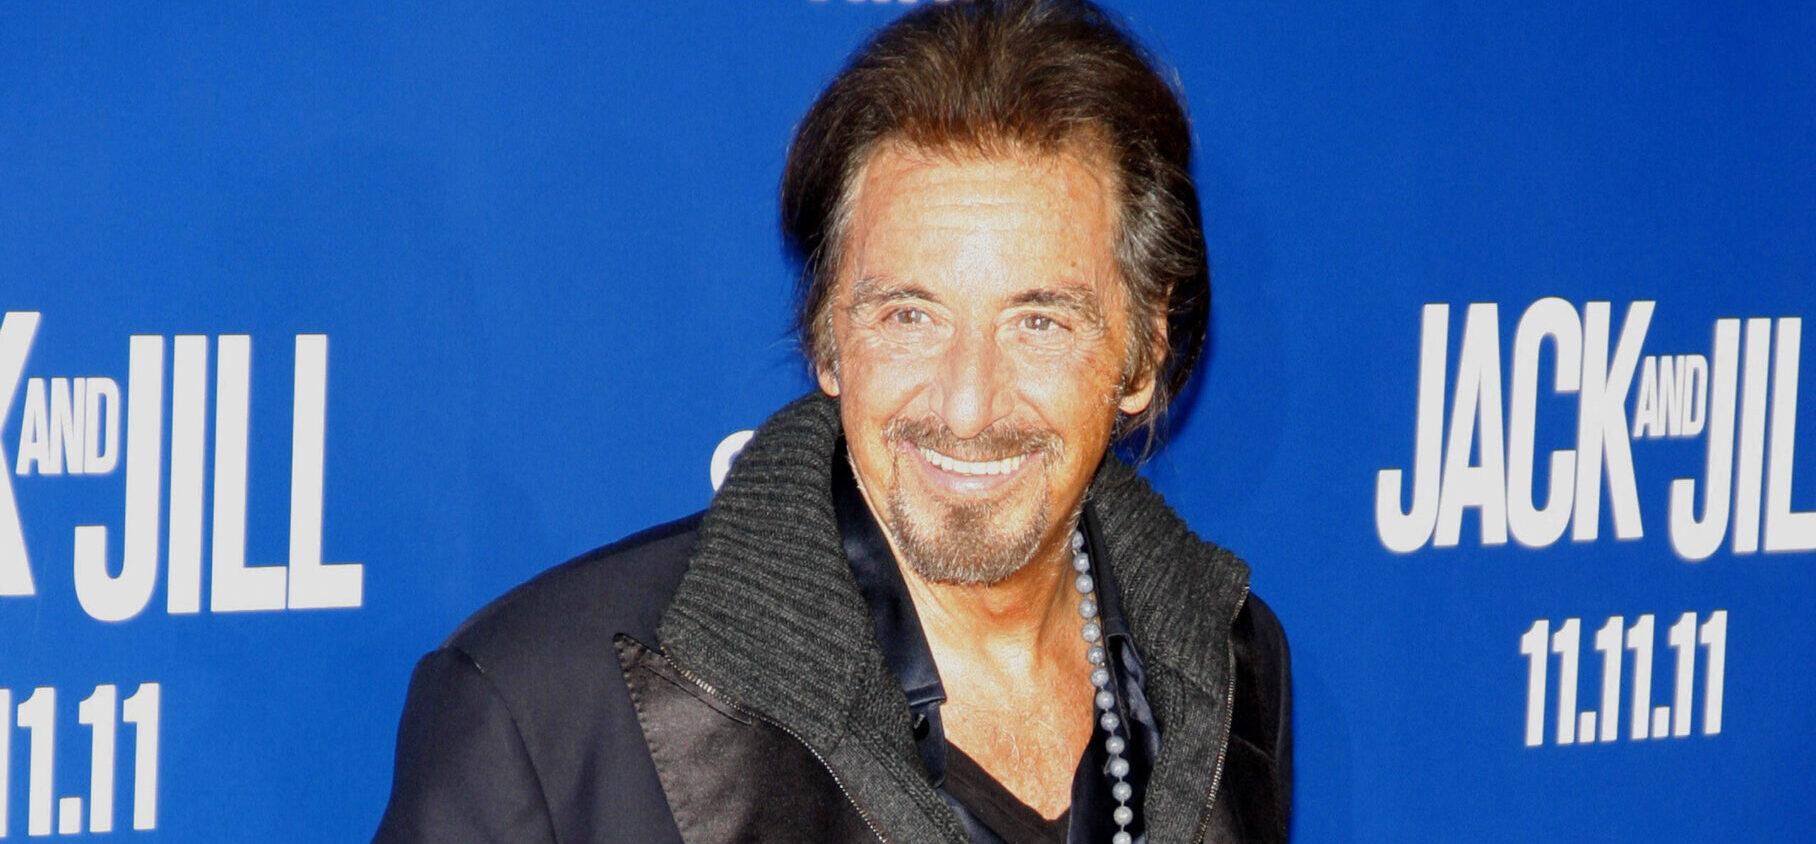 Al Pacino's Ex-Girlfriend Files For Physical Custody Of Their Son